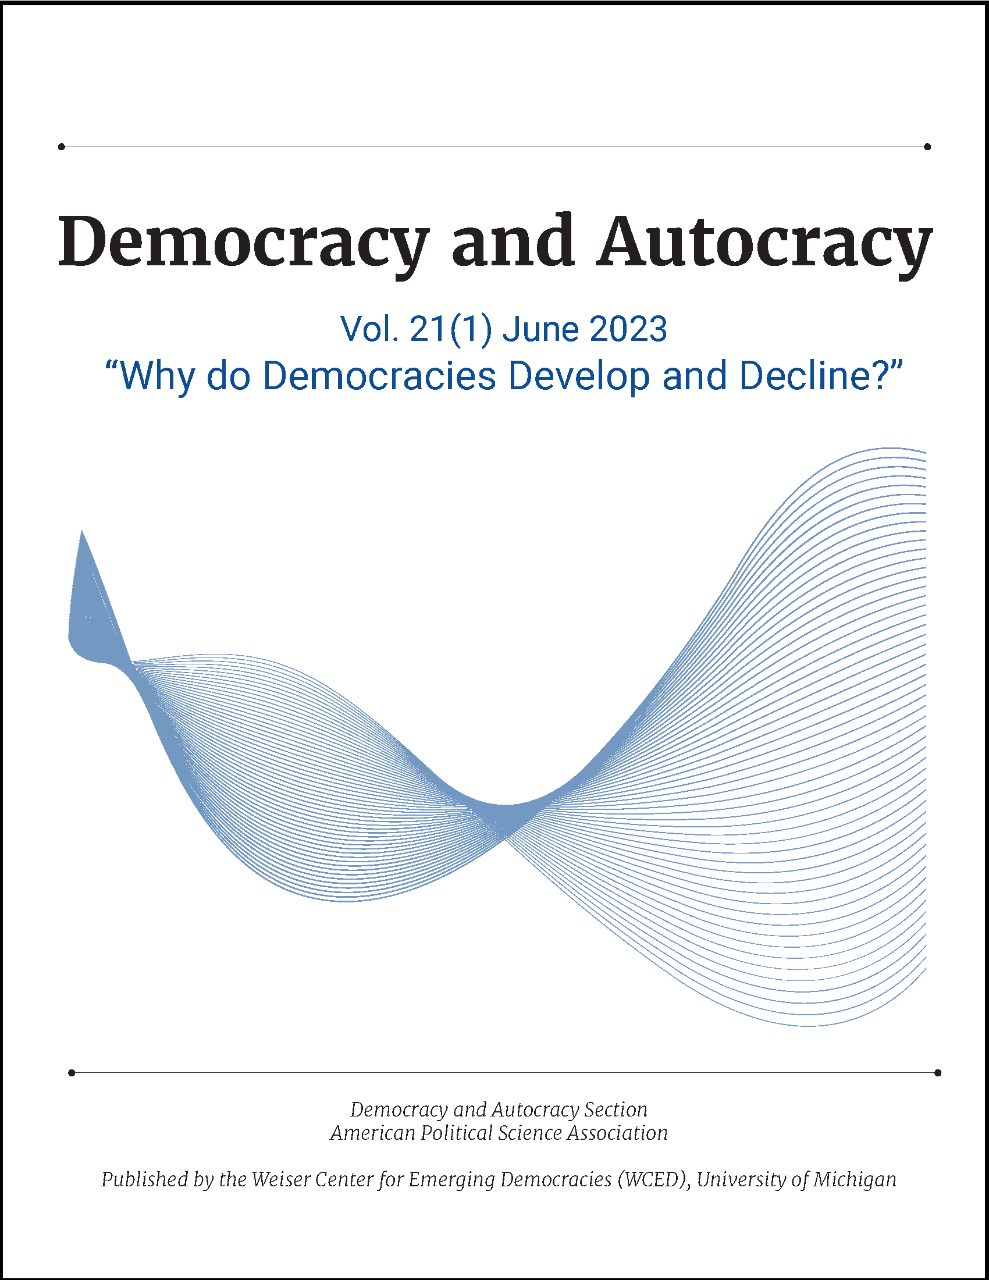 Democracy and Autocracy cover "Why do Democracies Develop and Decline?"